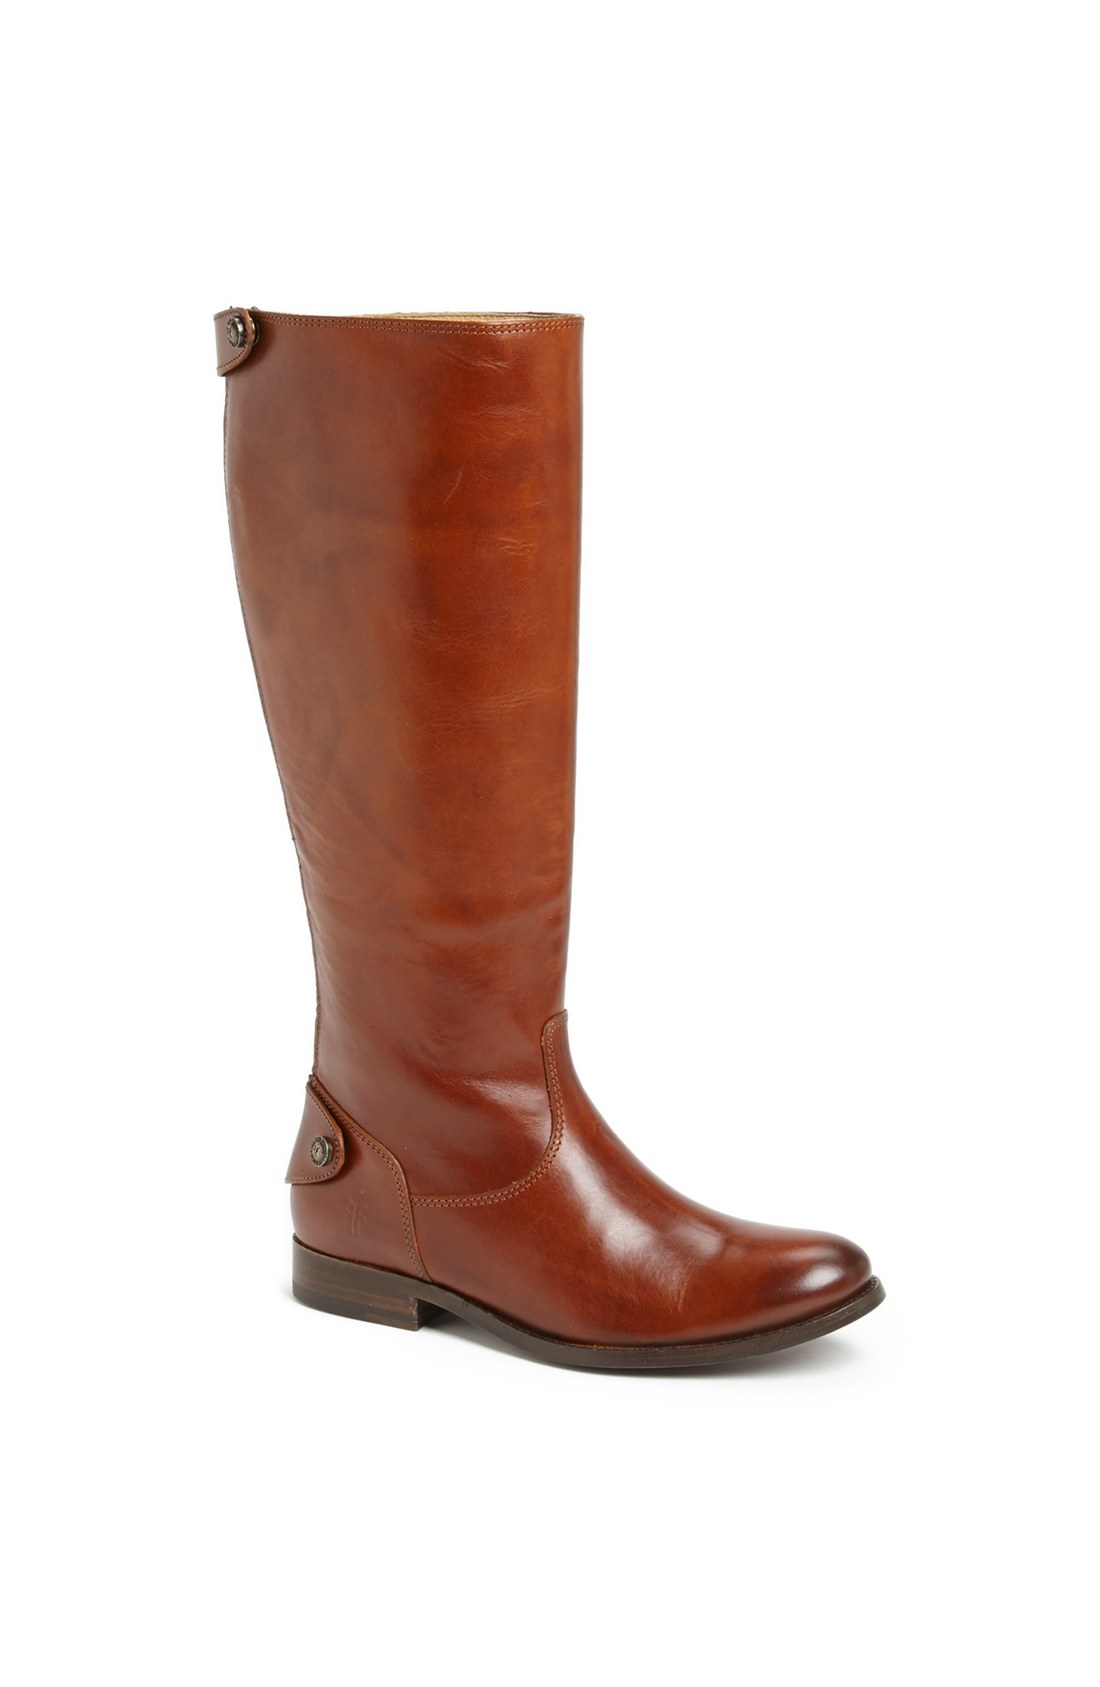 Frye Melissa Button Back Zip Boot in Brown (Cognac Extended) | Lyst